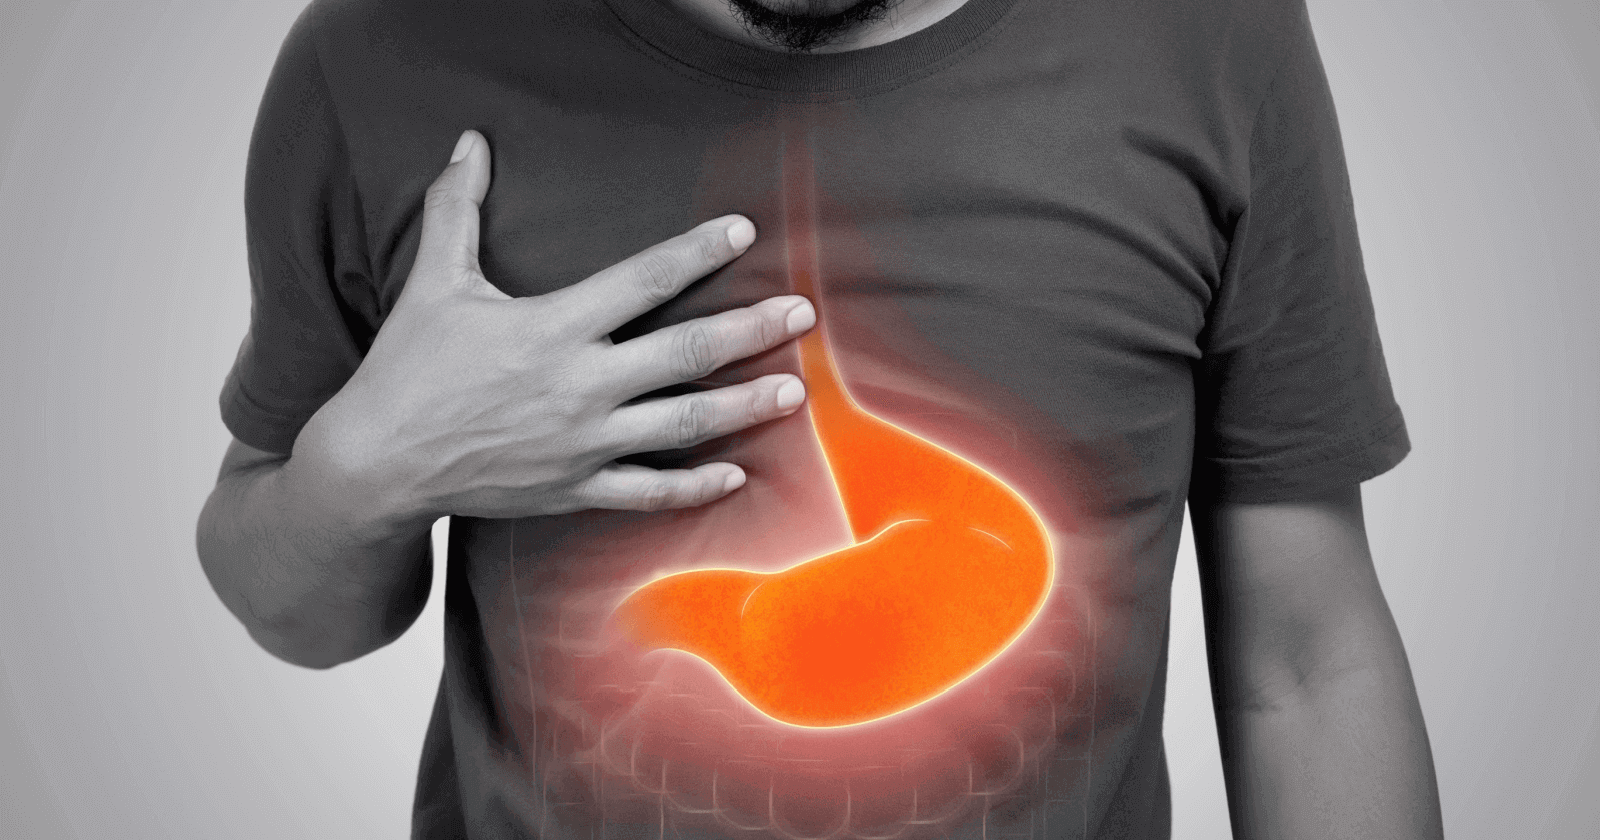 Intestinal Gas: Meaning, symptoms, causes, and other details